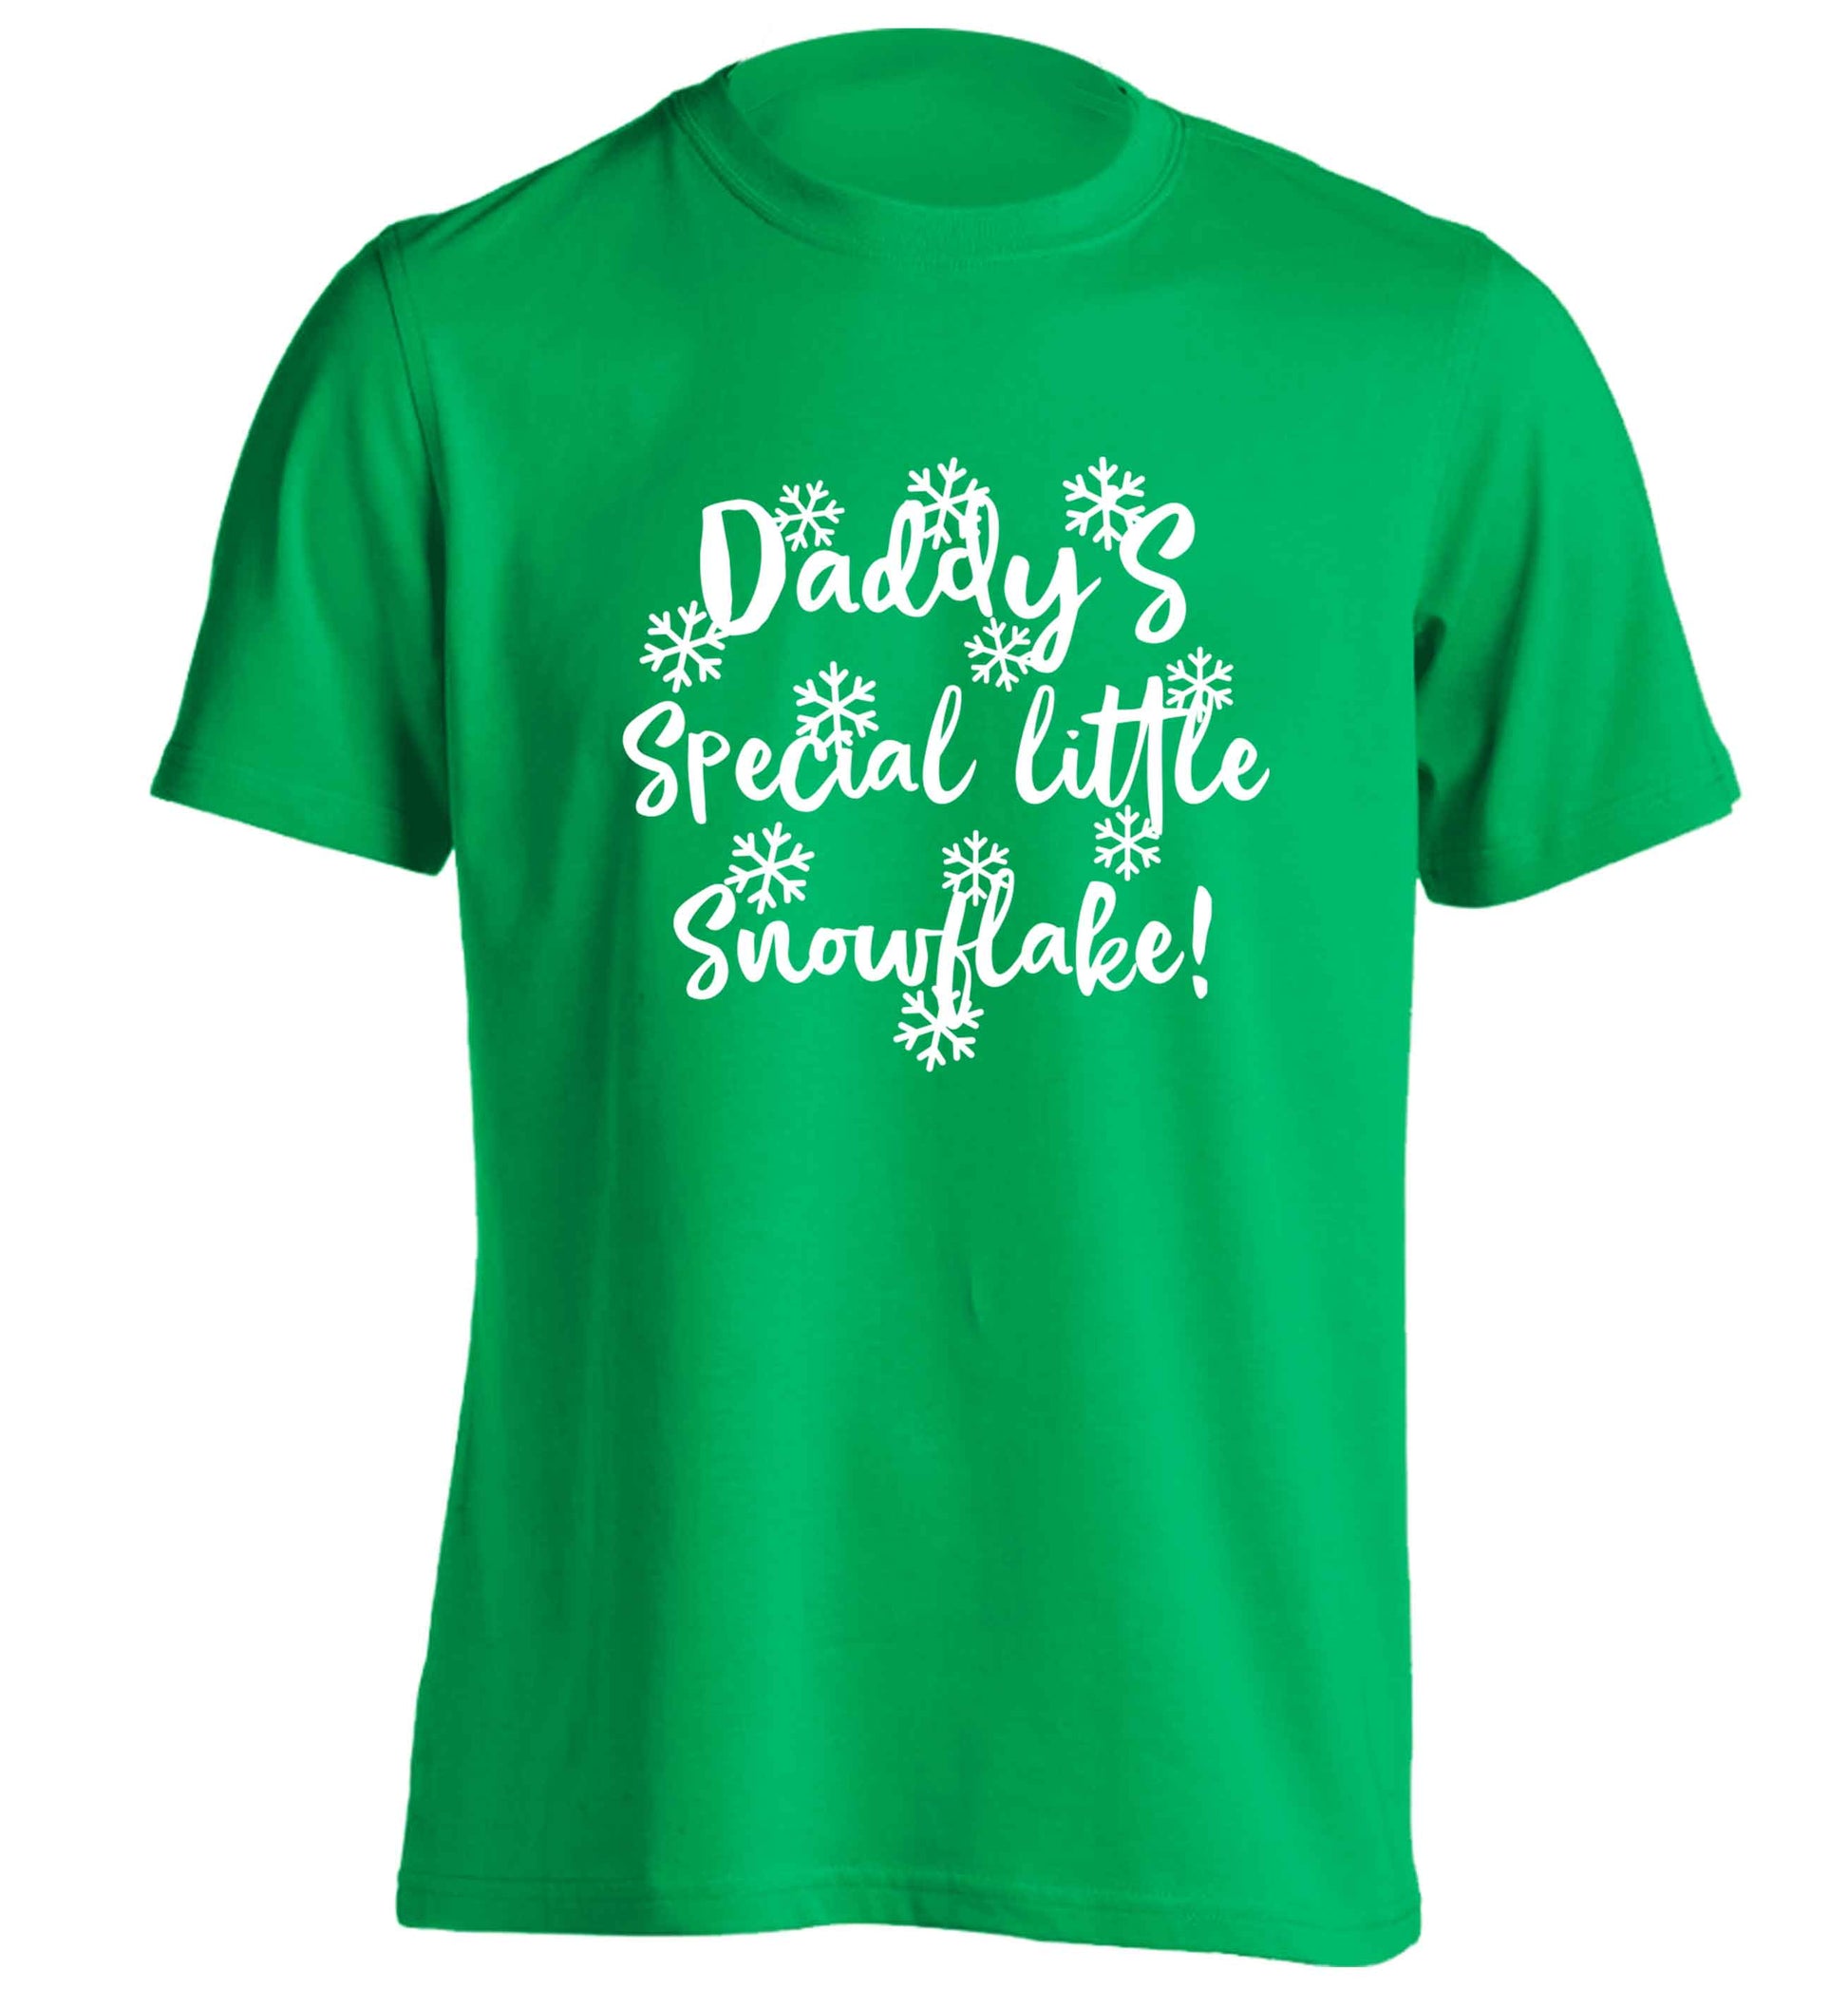 Daddy's special little snowflake adults unisex green Tshirt 2XL